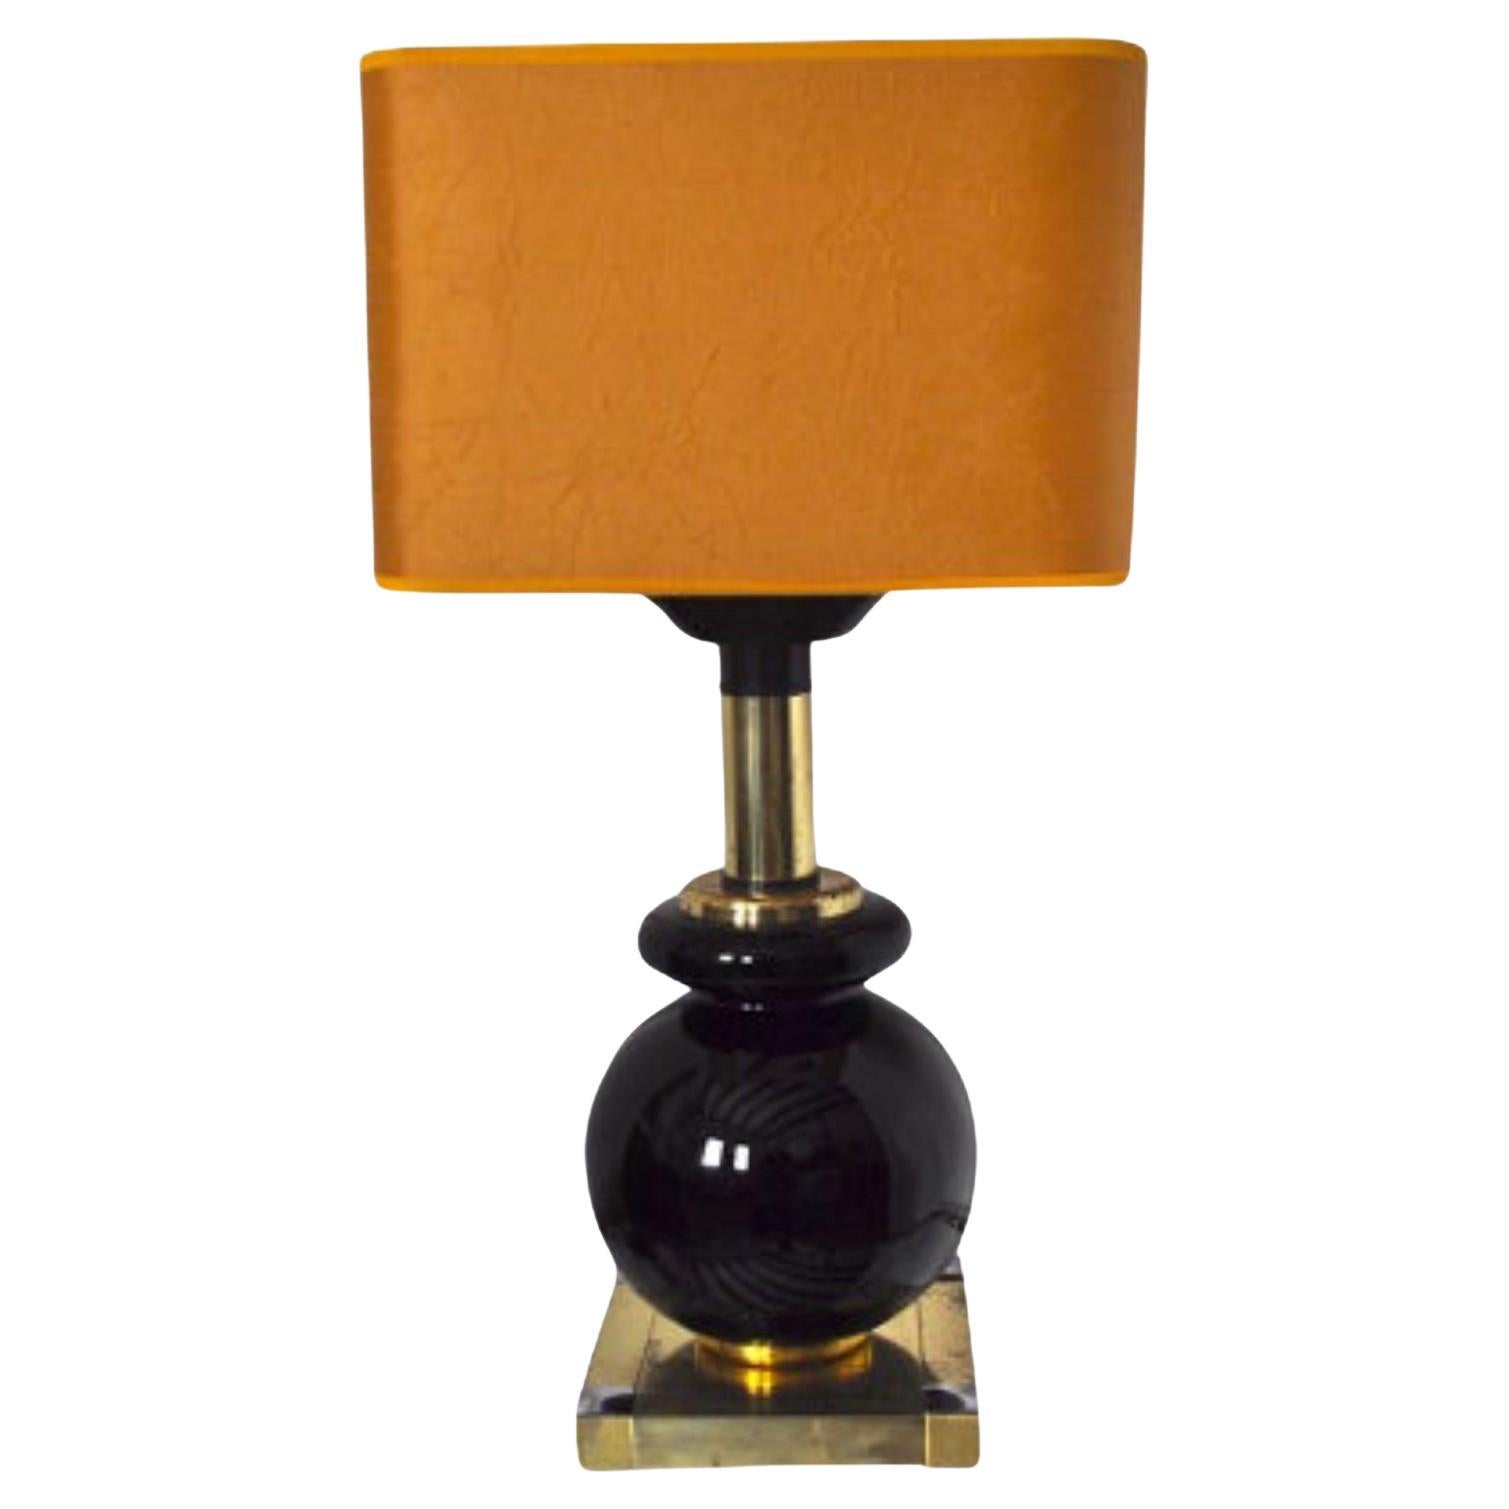 1970s Lumica Brass and Black Ceramic Table Lamp, Italy